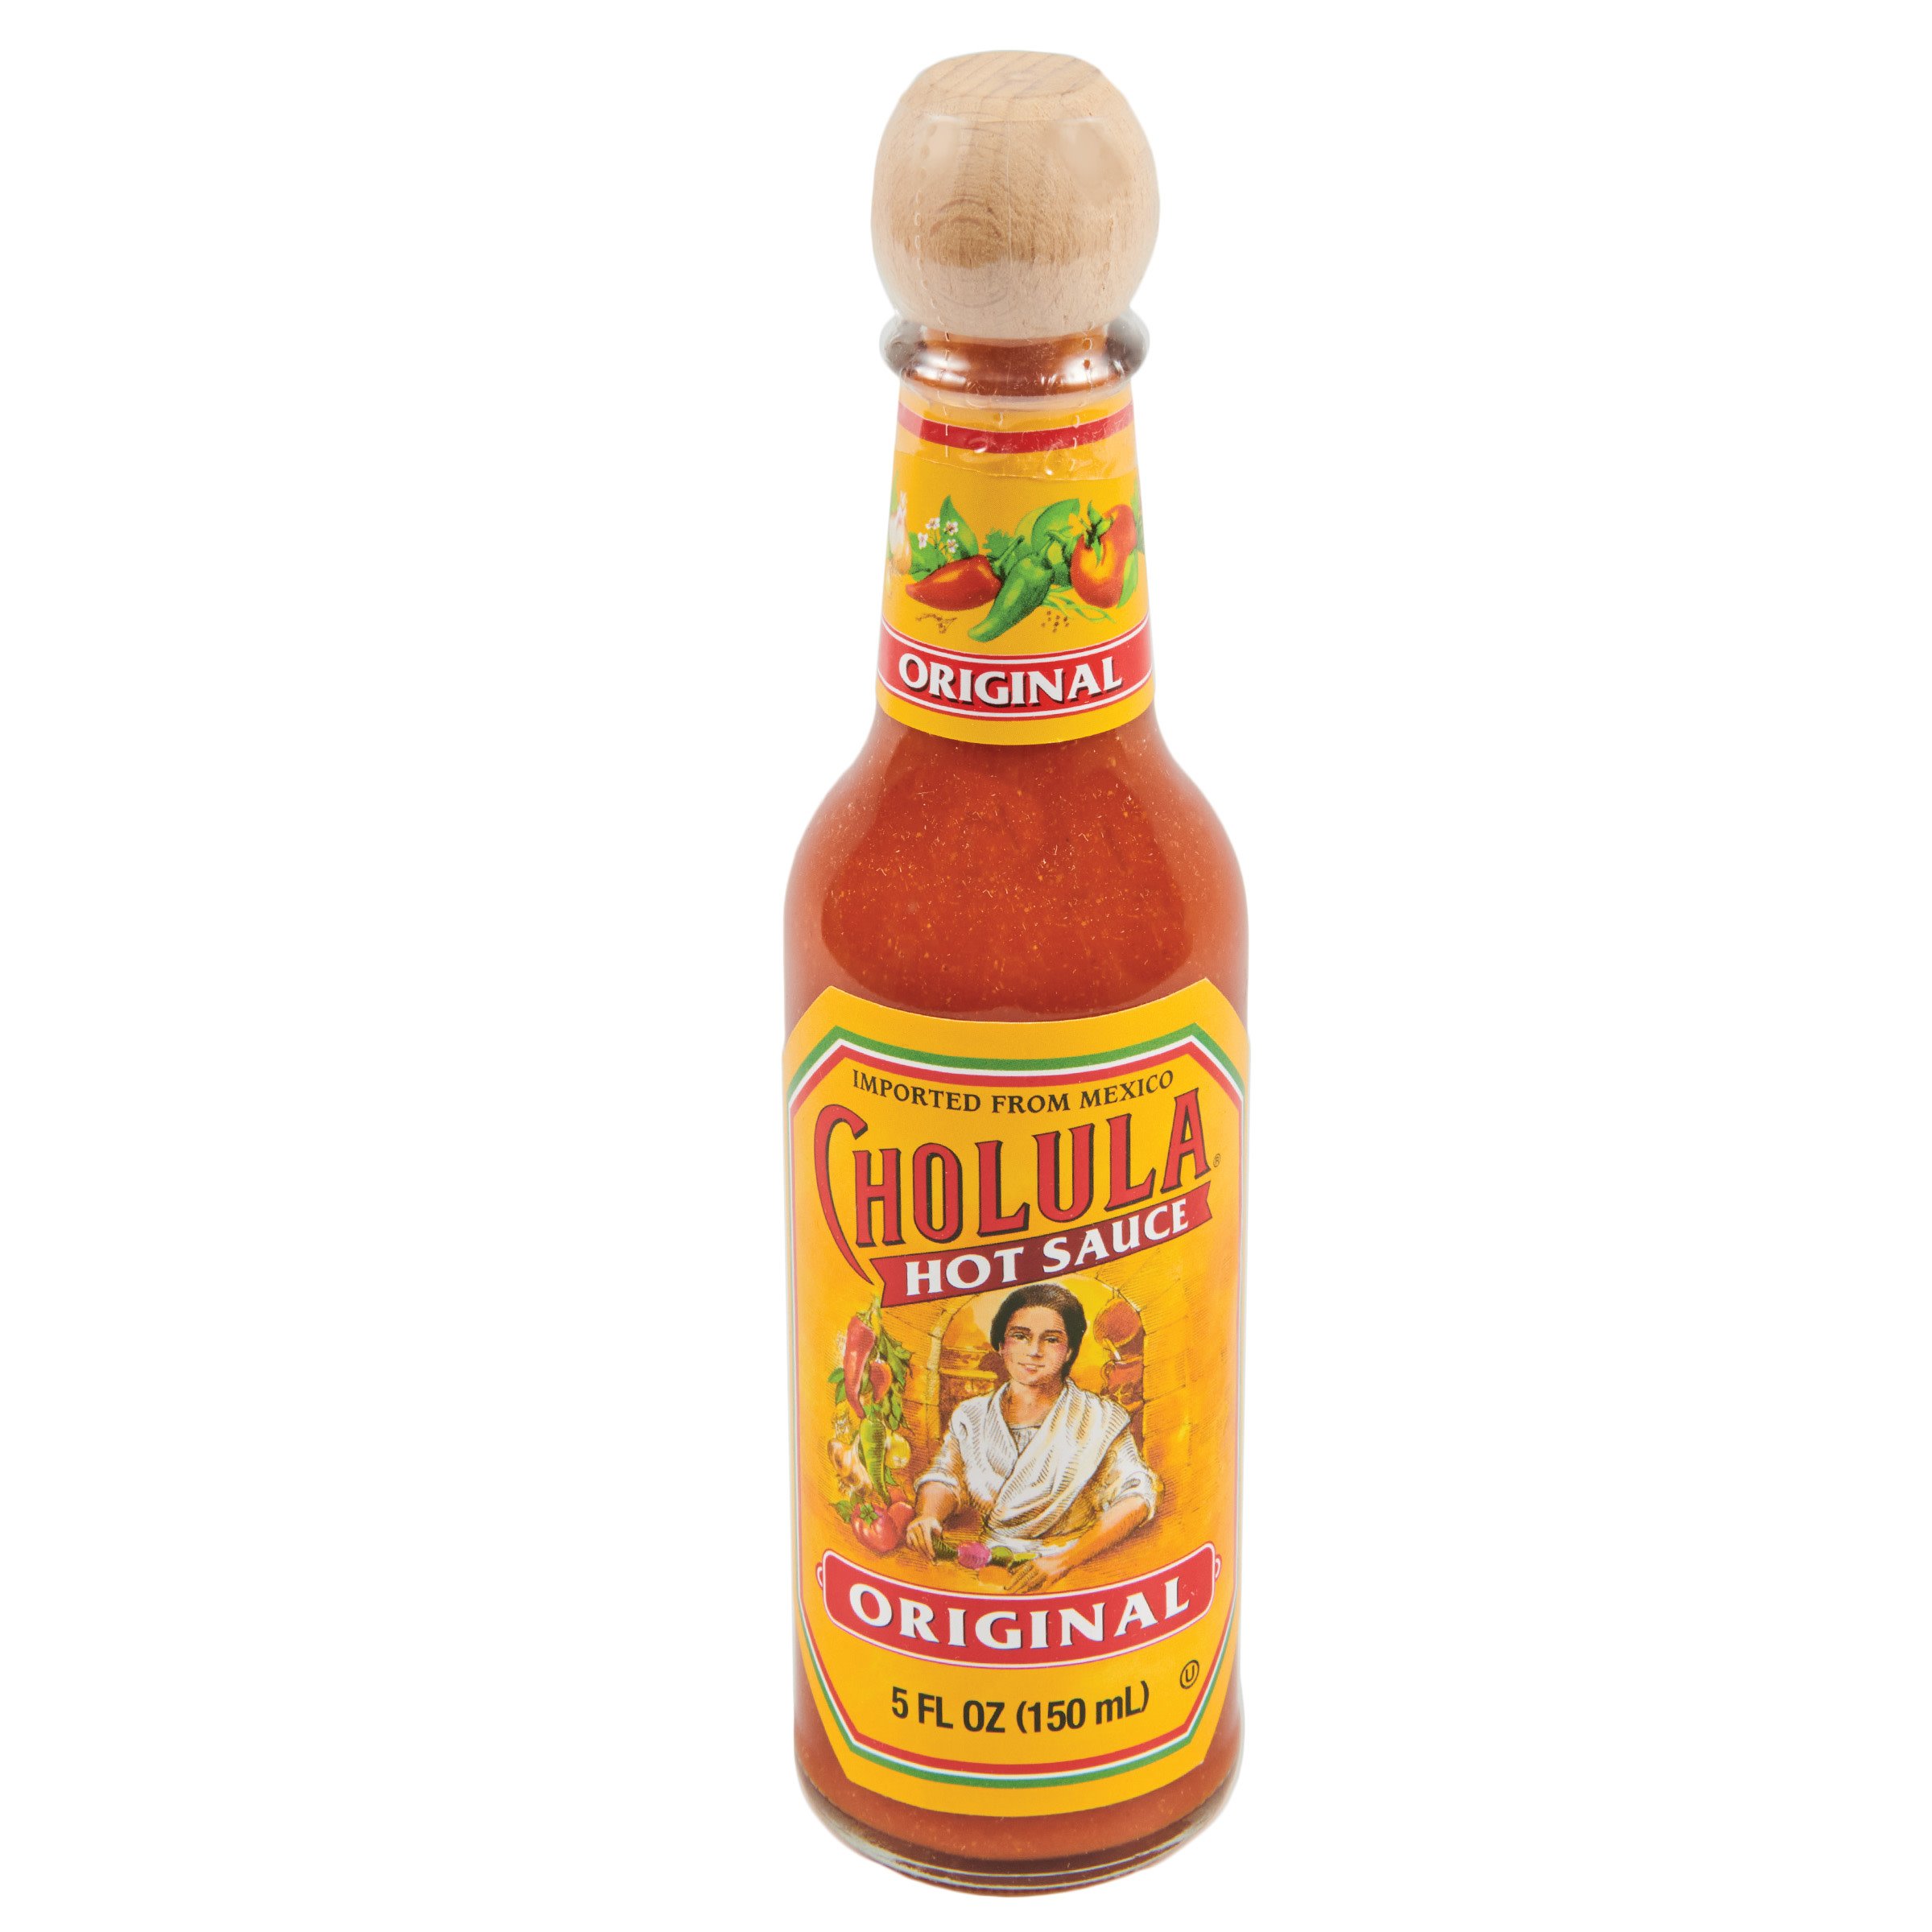 You can now buy the Cholula Spicy Ketchup in stores : r/Whataburger